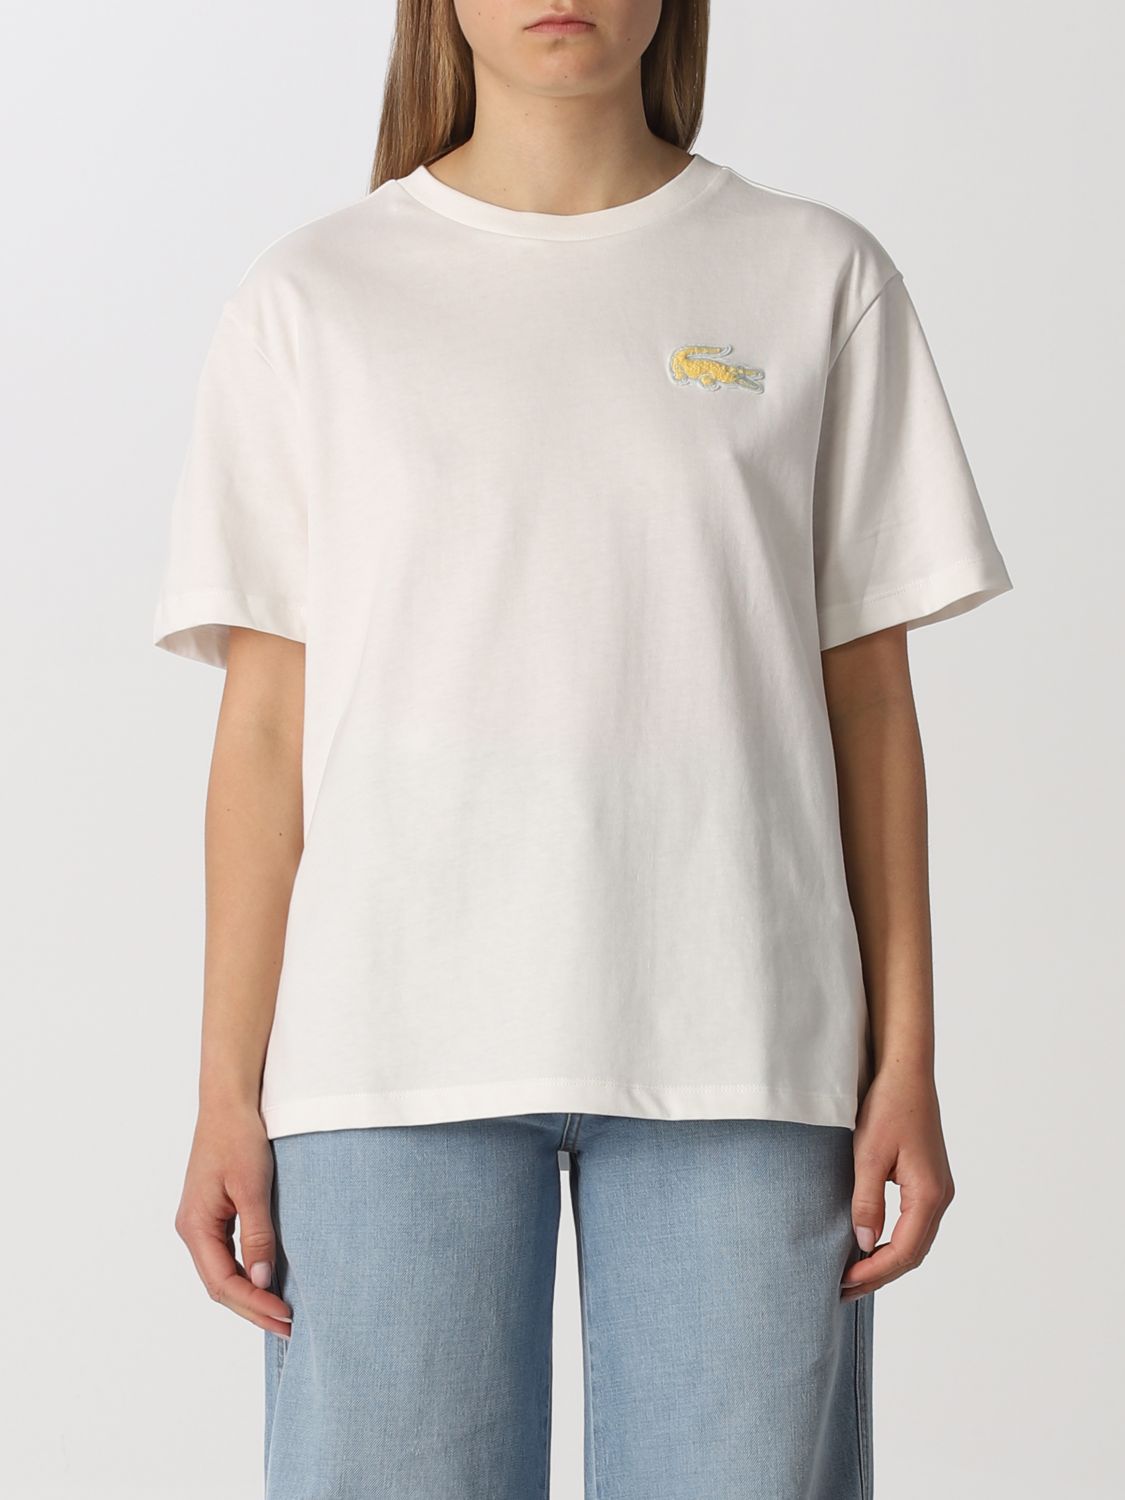 LACOSTE: cotton T-shirt with patch - White | Lacoste t-shirt TF5768 ...